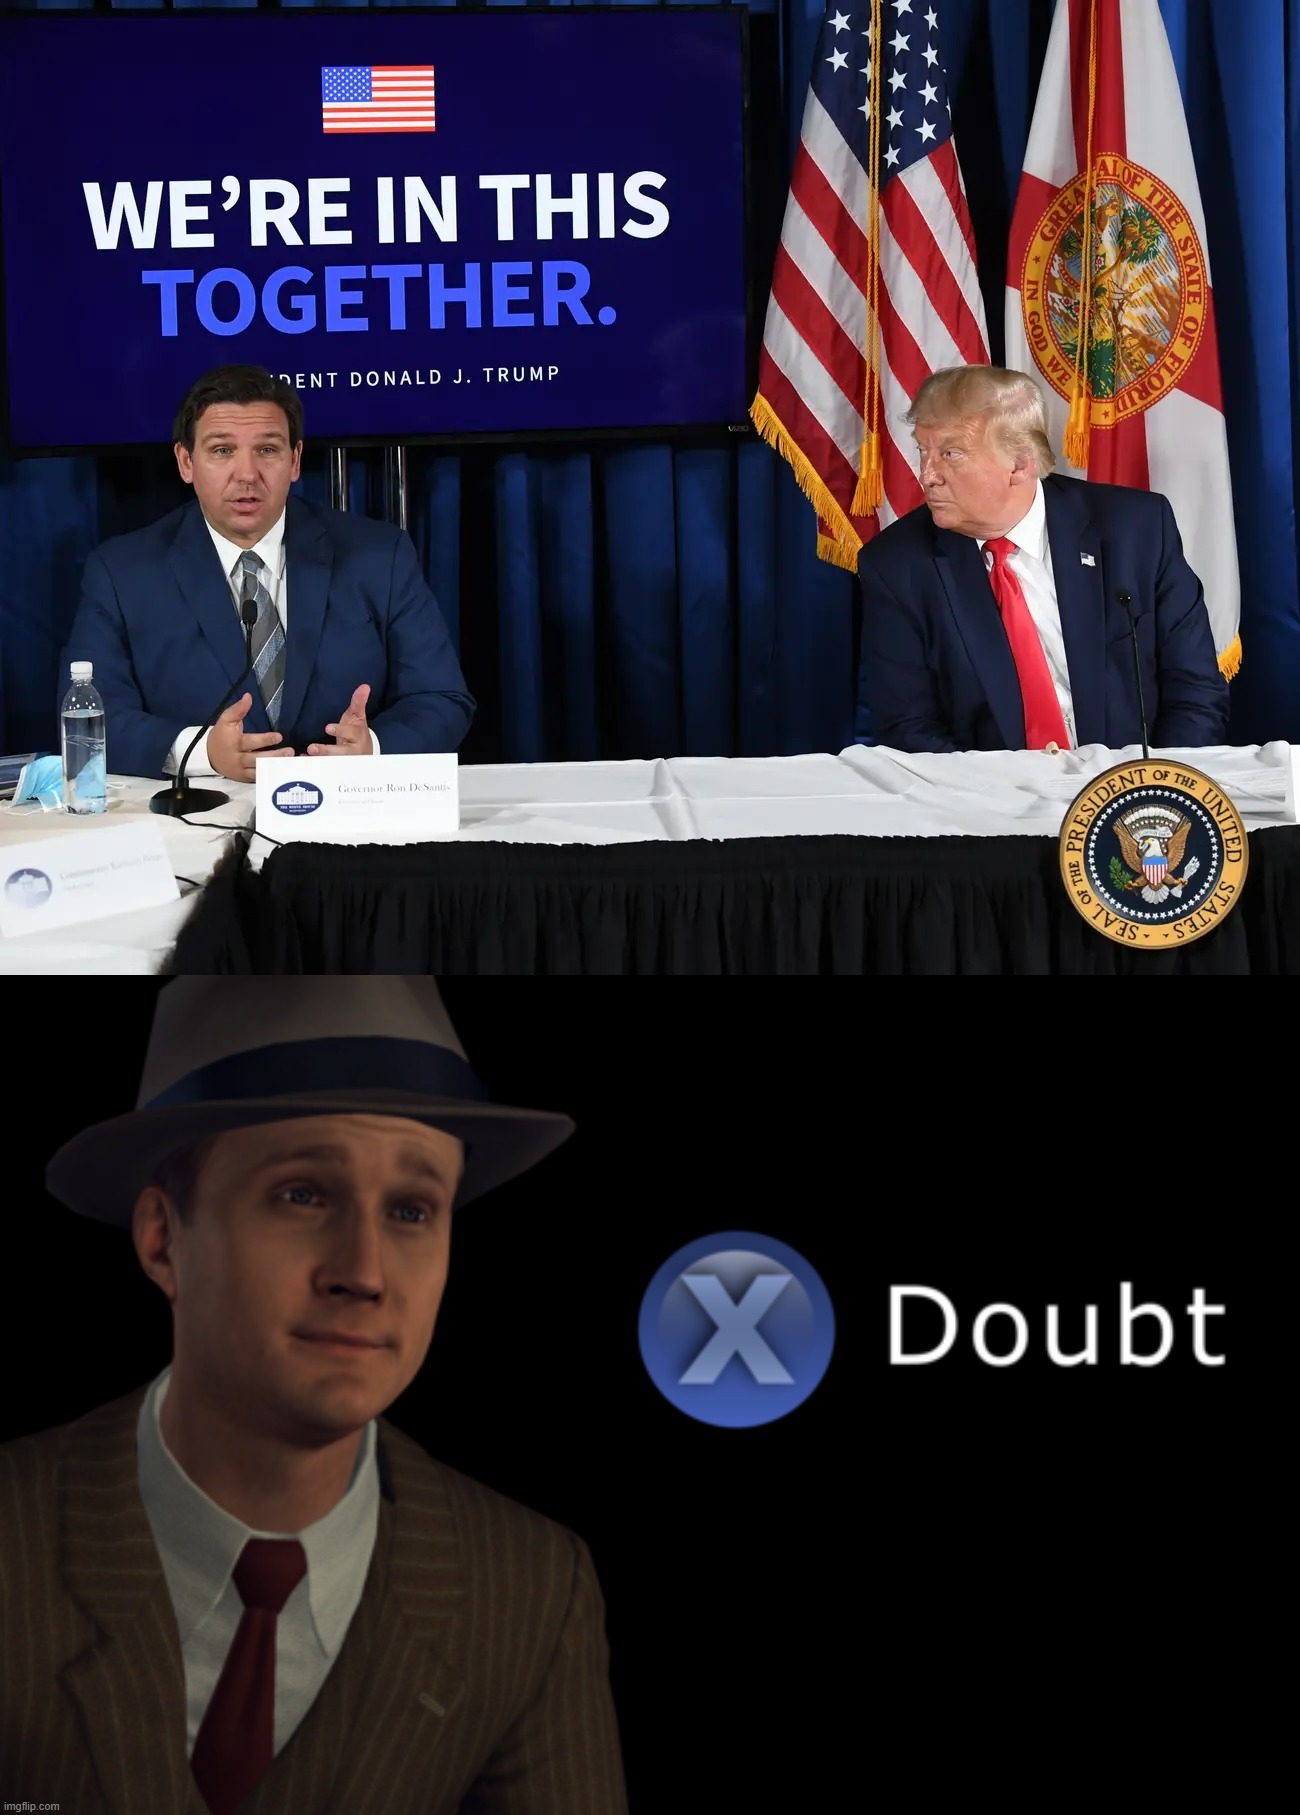 image tagged in trump and desantis we're in this together,x doubt | made w/ Imgflip meme maker